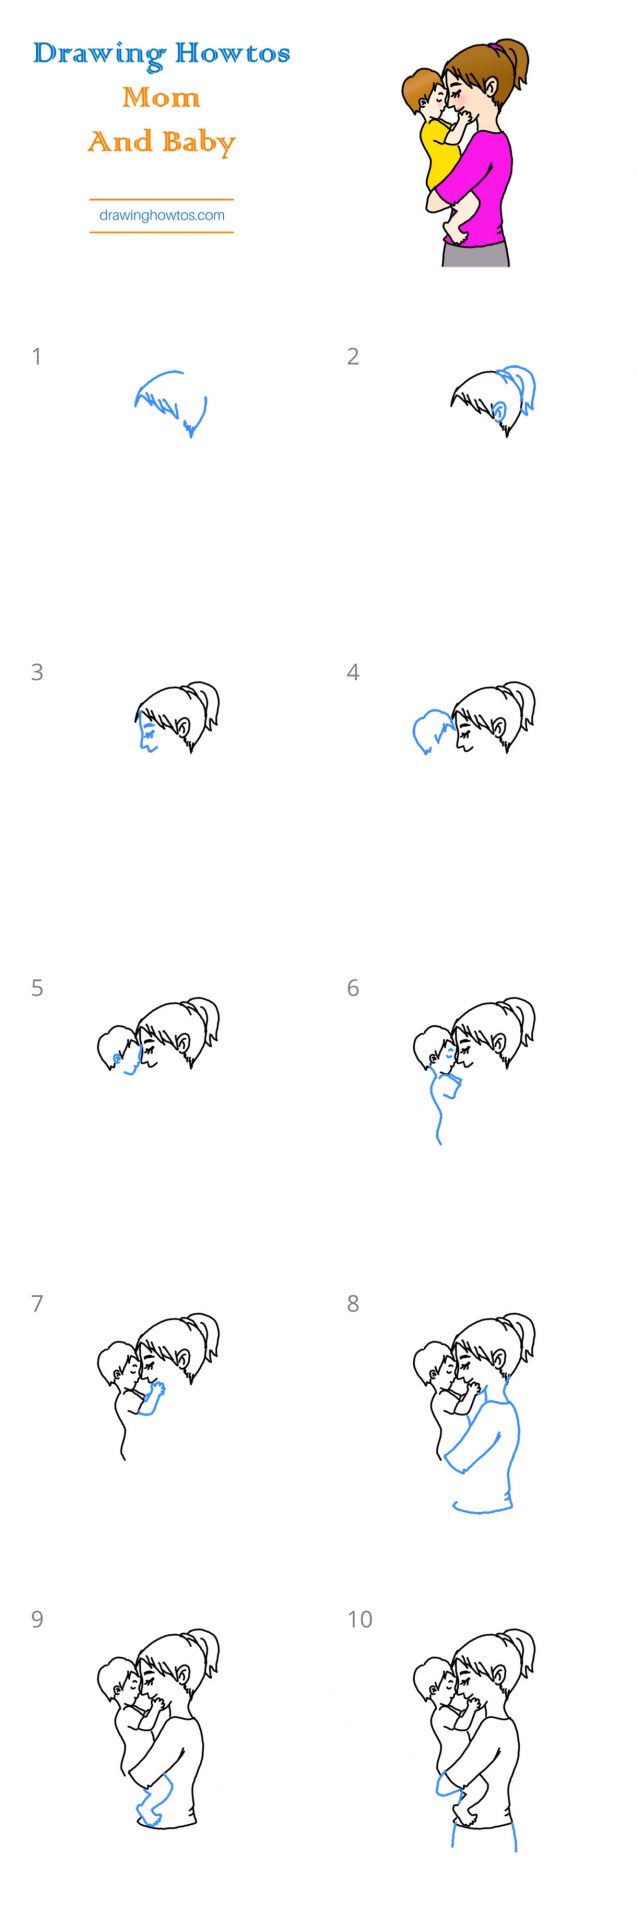 How to Draw Mom and Baby Step by Step